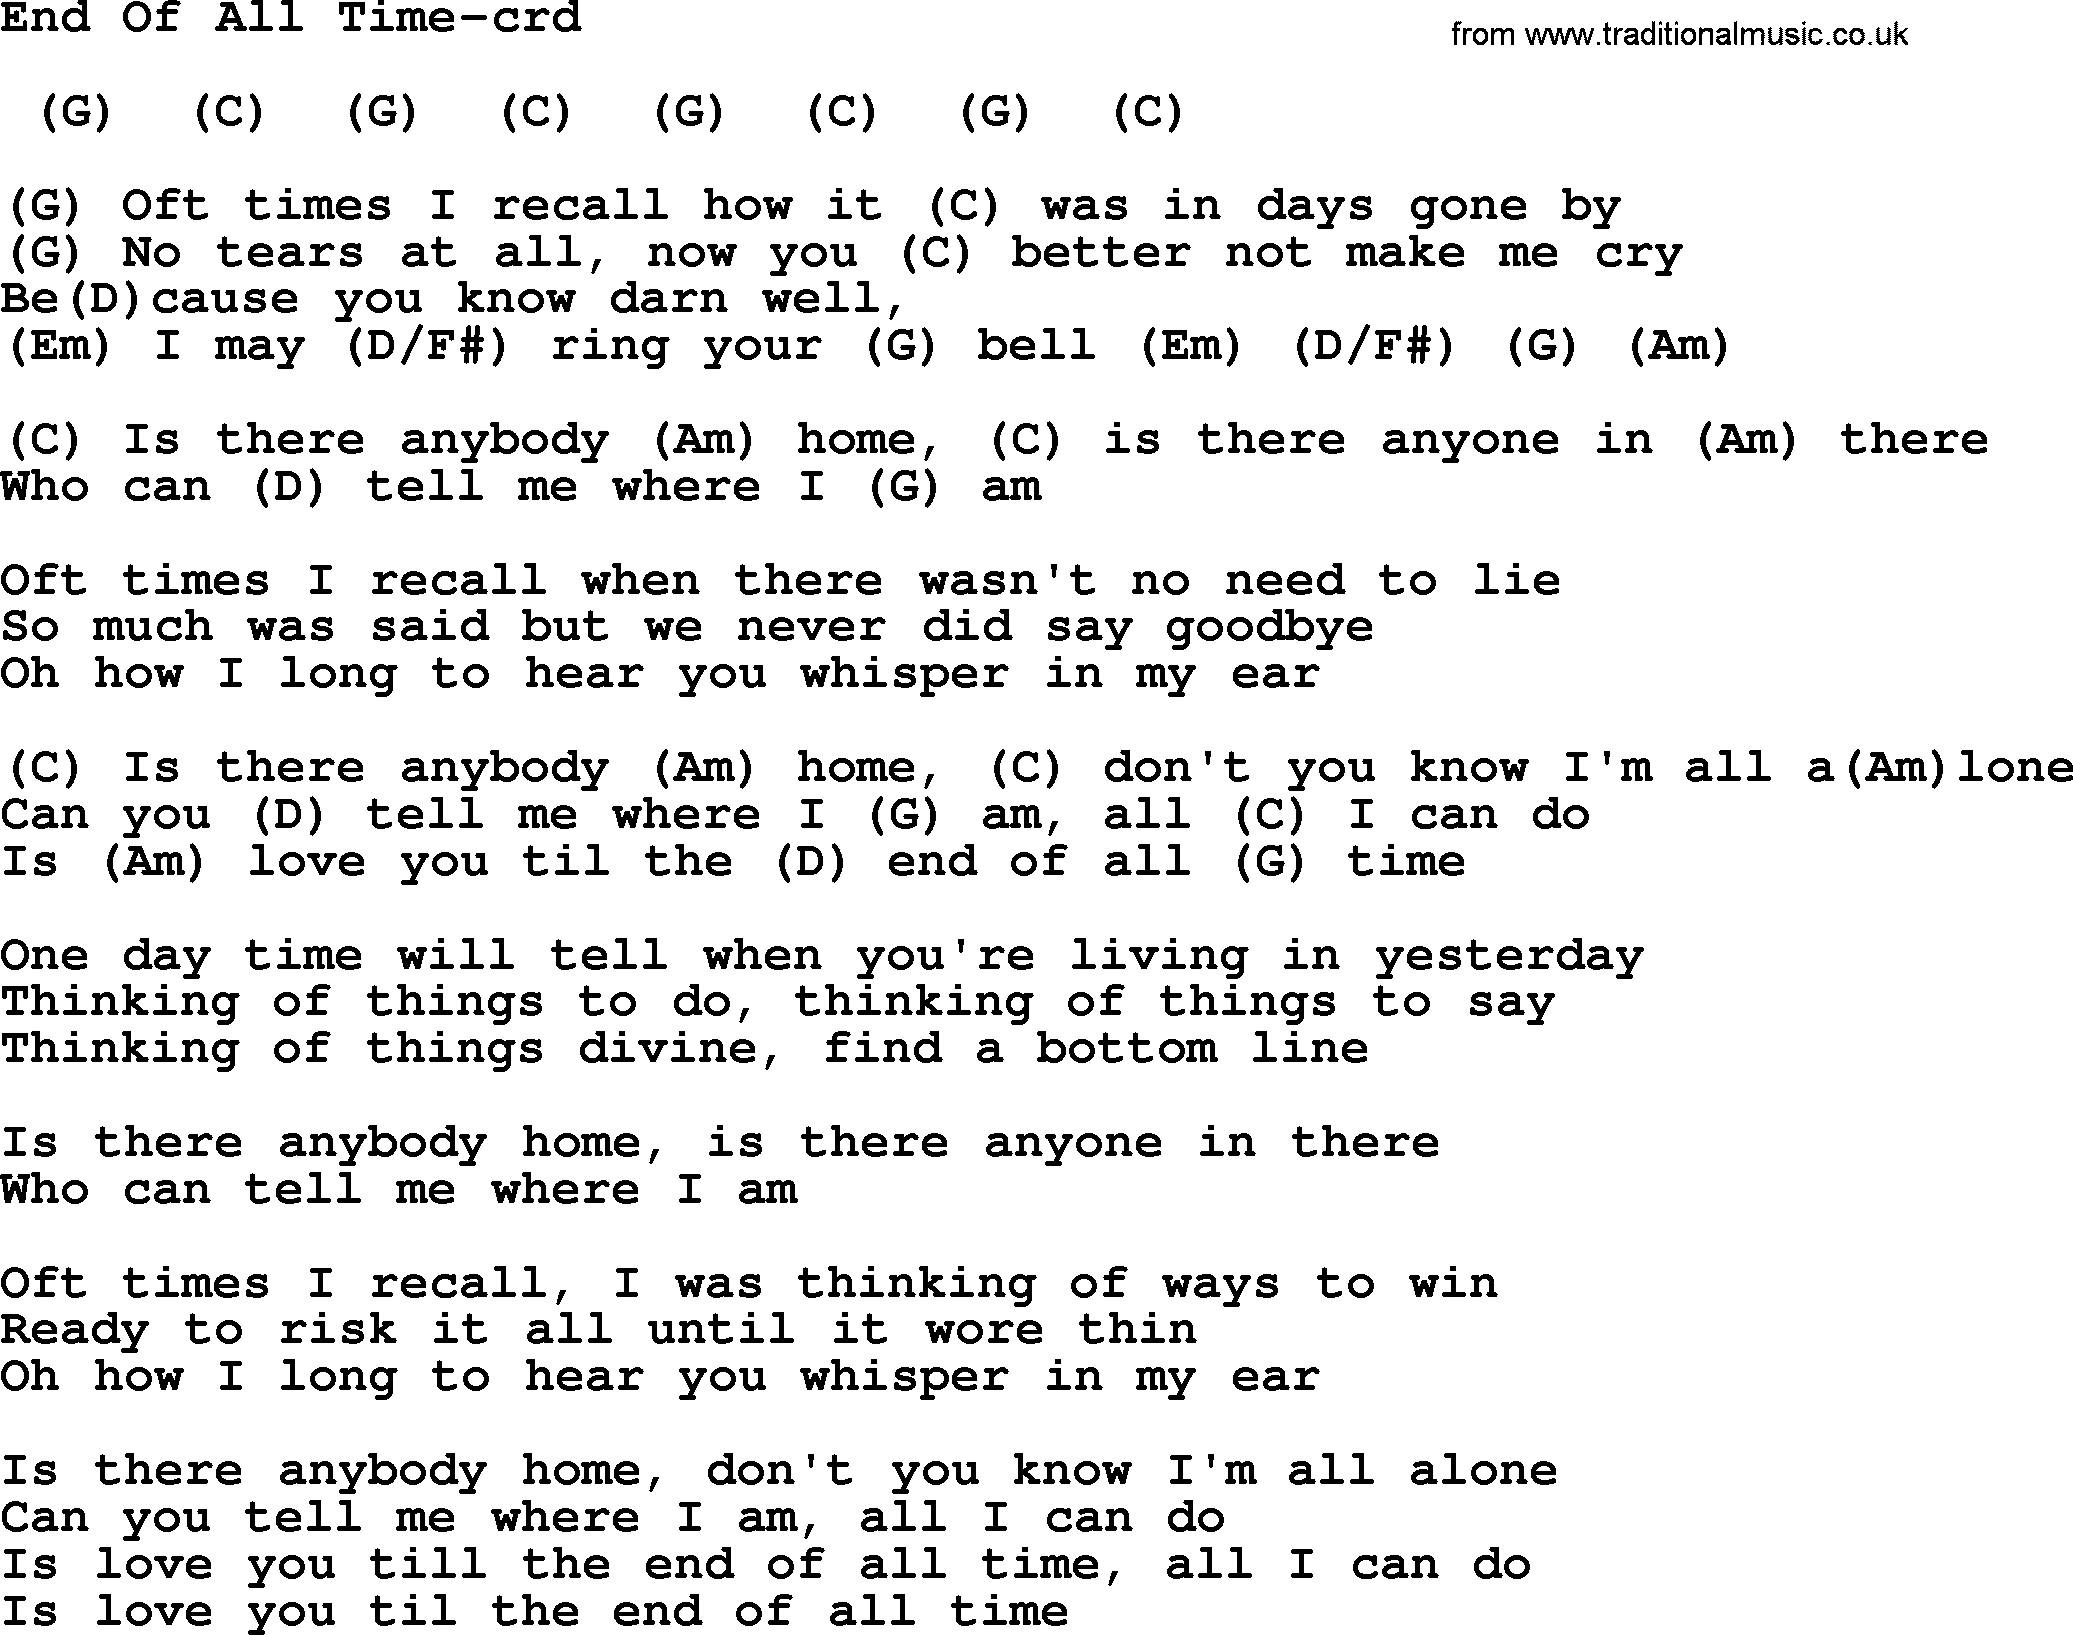 Gordon Lightfoot song End Of All Time, lyrics and chords